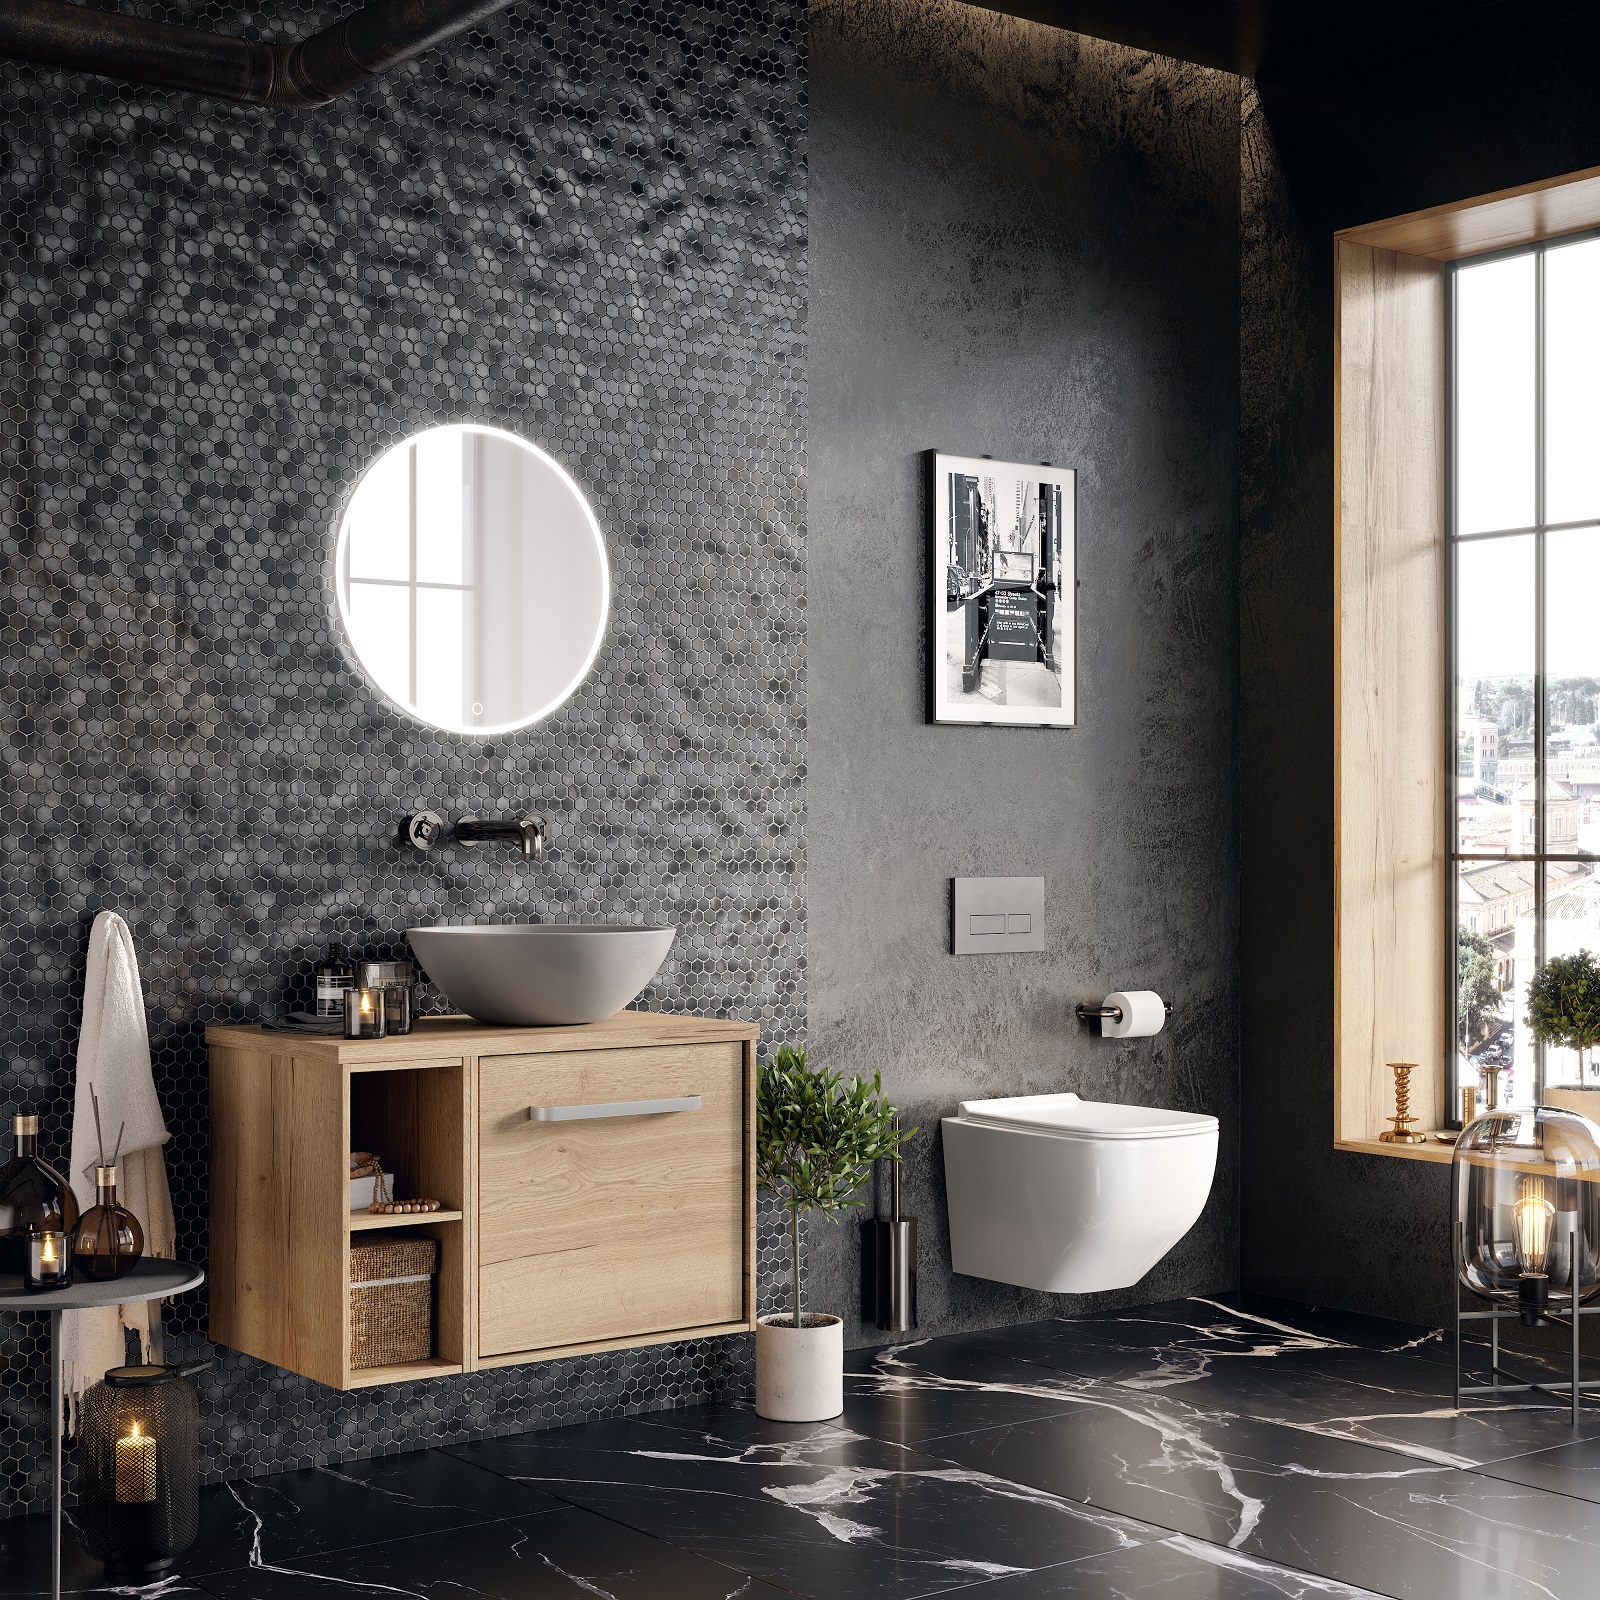 Lifestyle image of a black bathroom design, featuring black marble floor tiles, black hexagonal wall tiles and a black textured wall